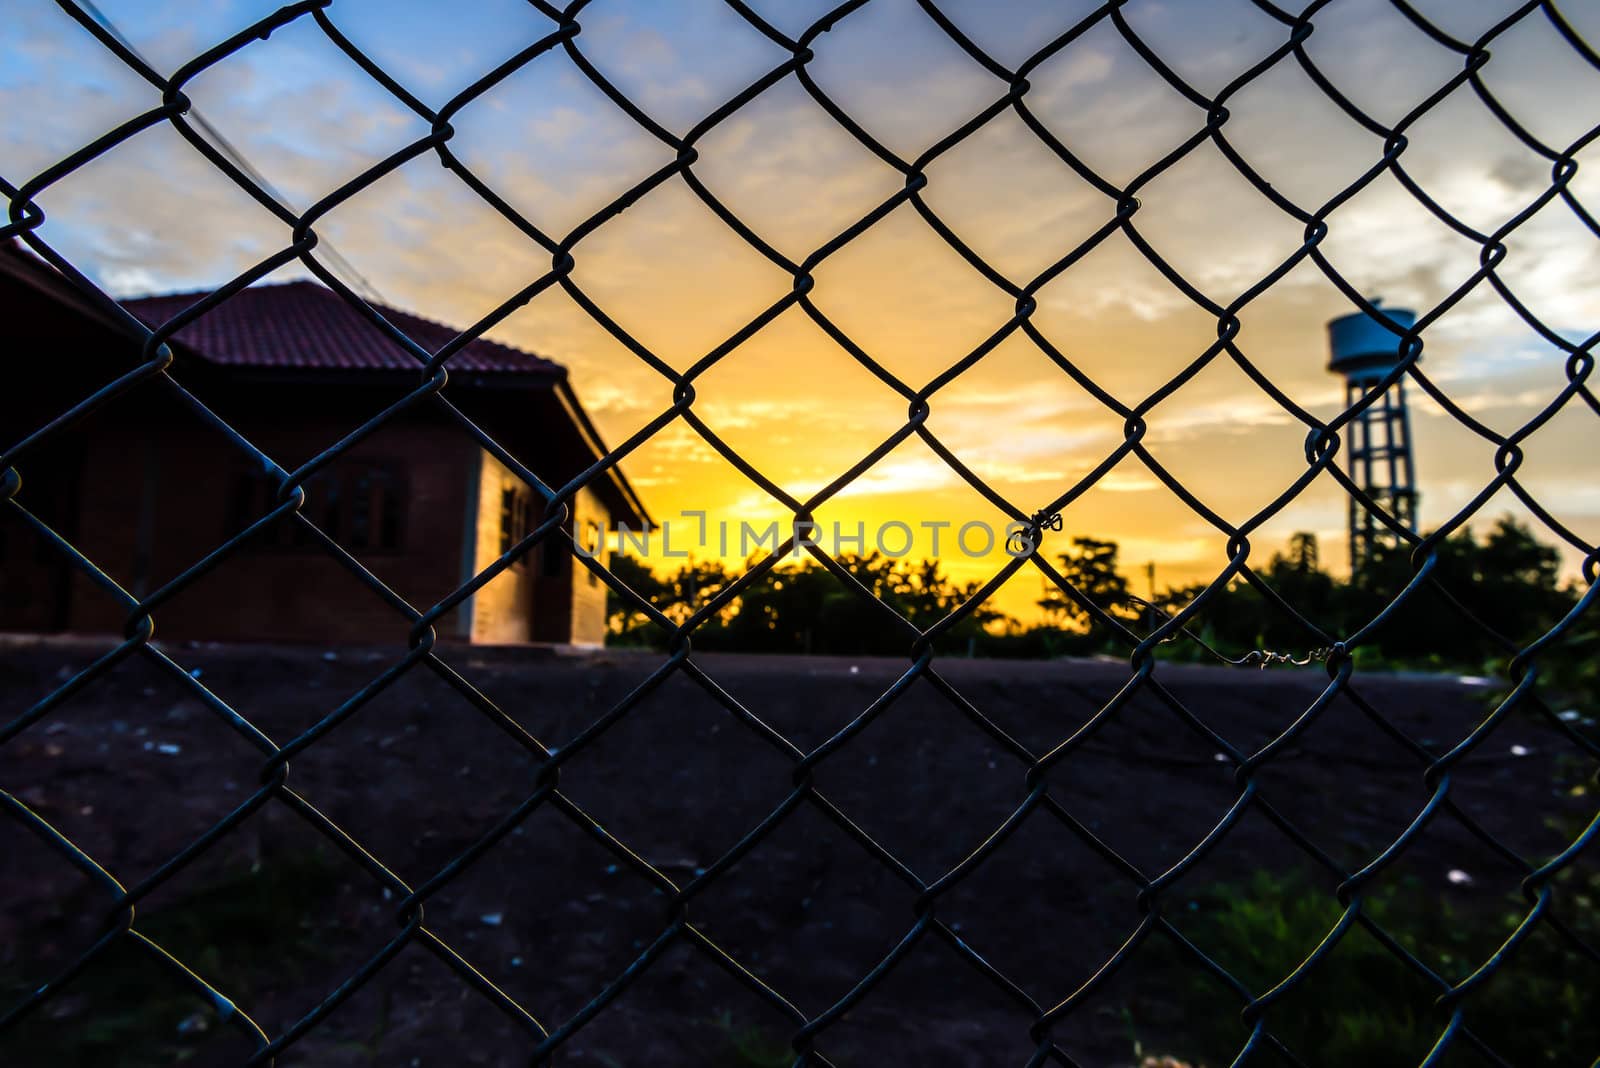 the beautiful fence mesh background with the blure sunset. by wmitrmatr